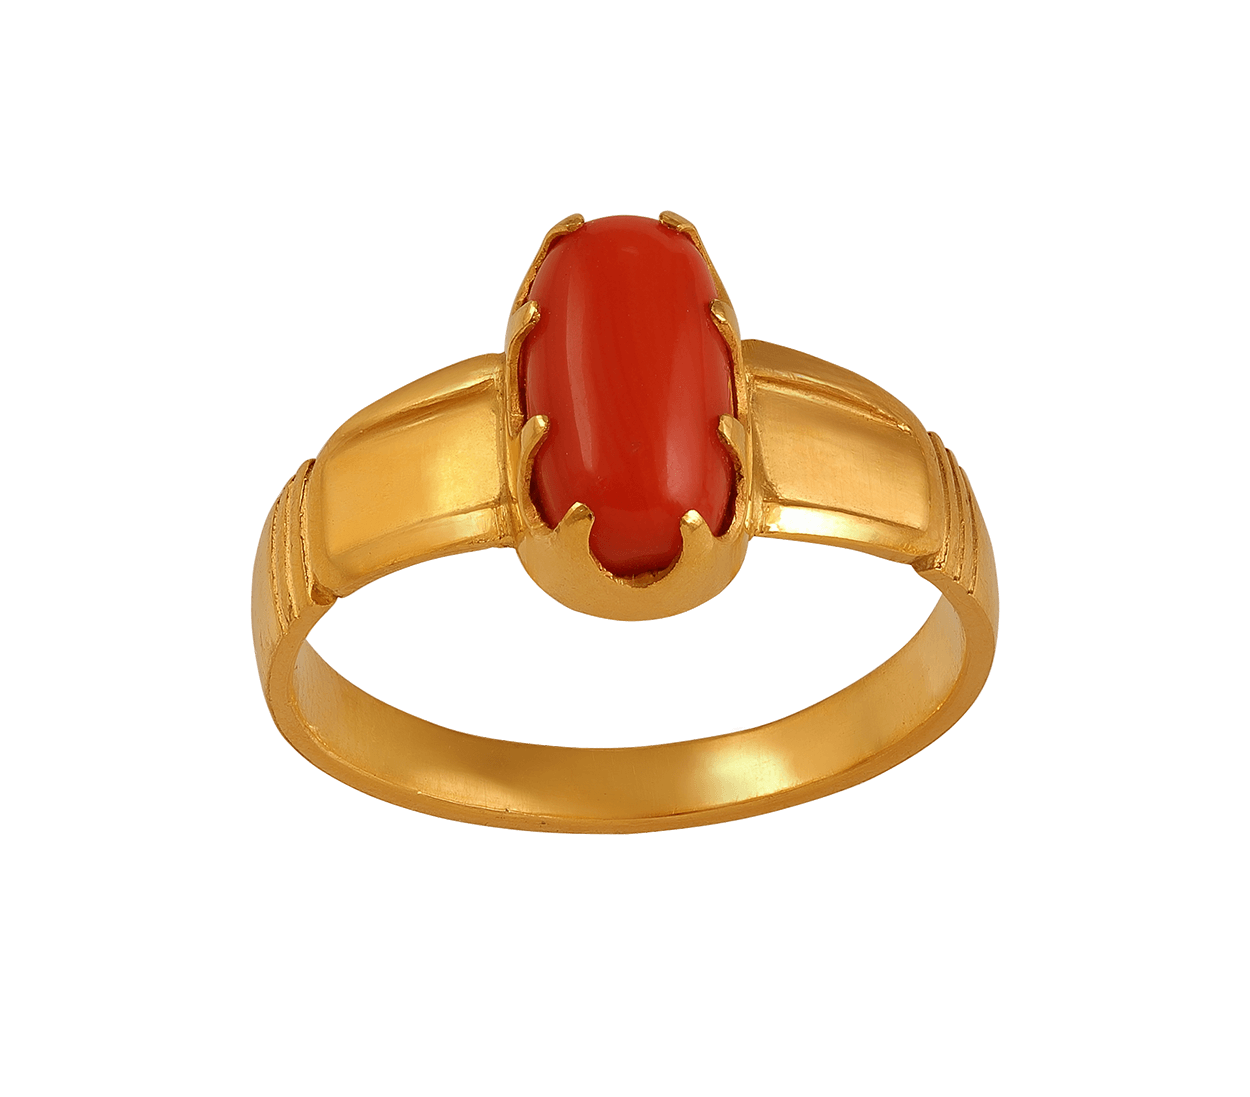 Top Beautiful Red Coral Rings Designs | Latest Marjan Stone Rings  Collection. - YouTube